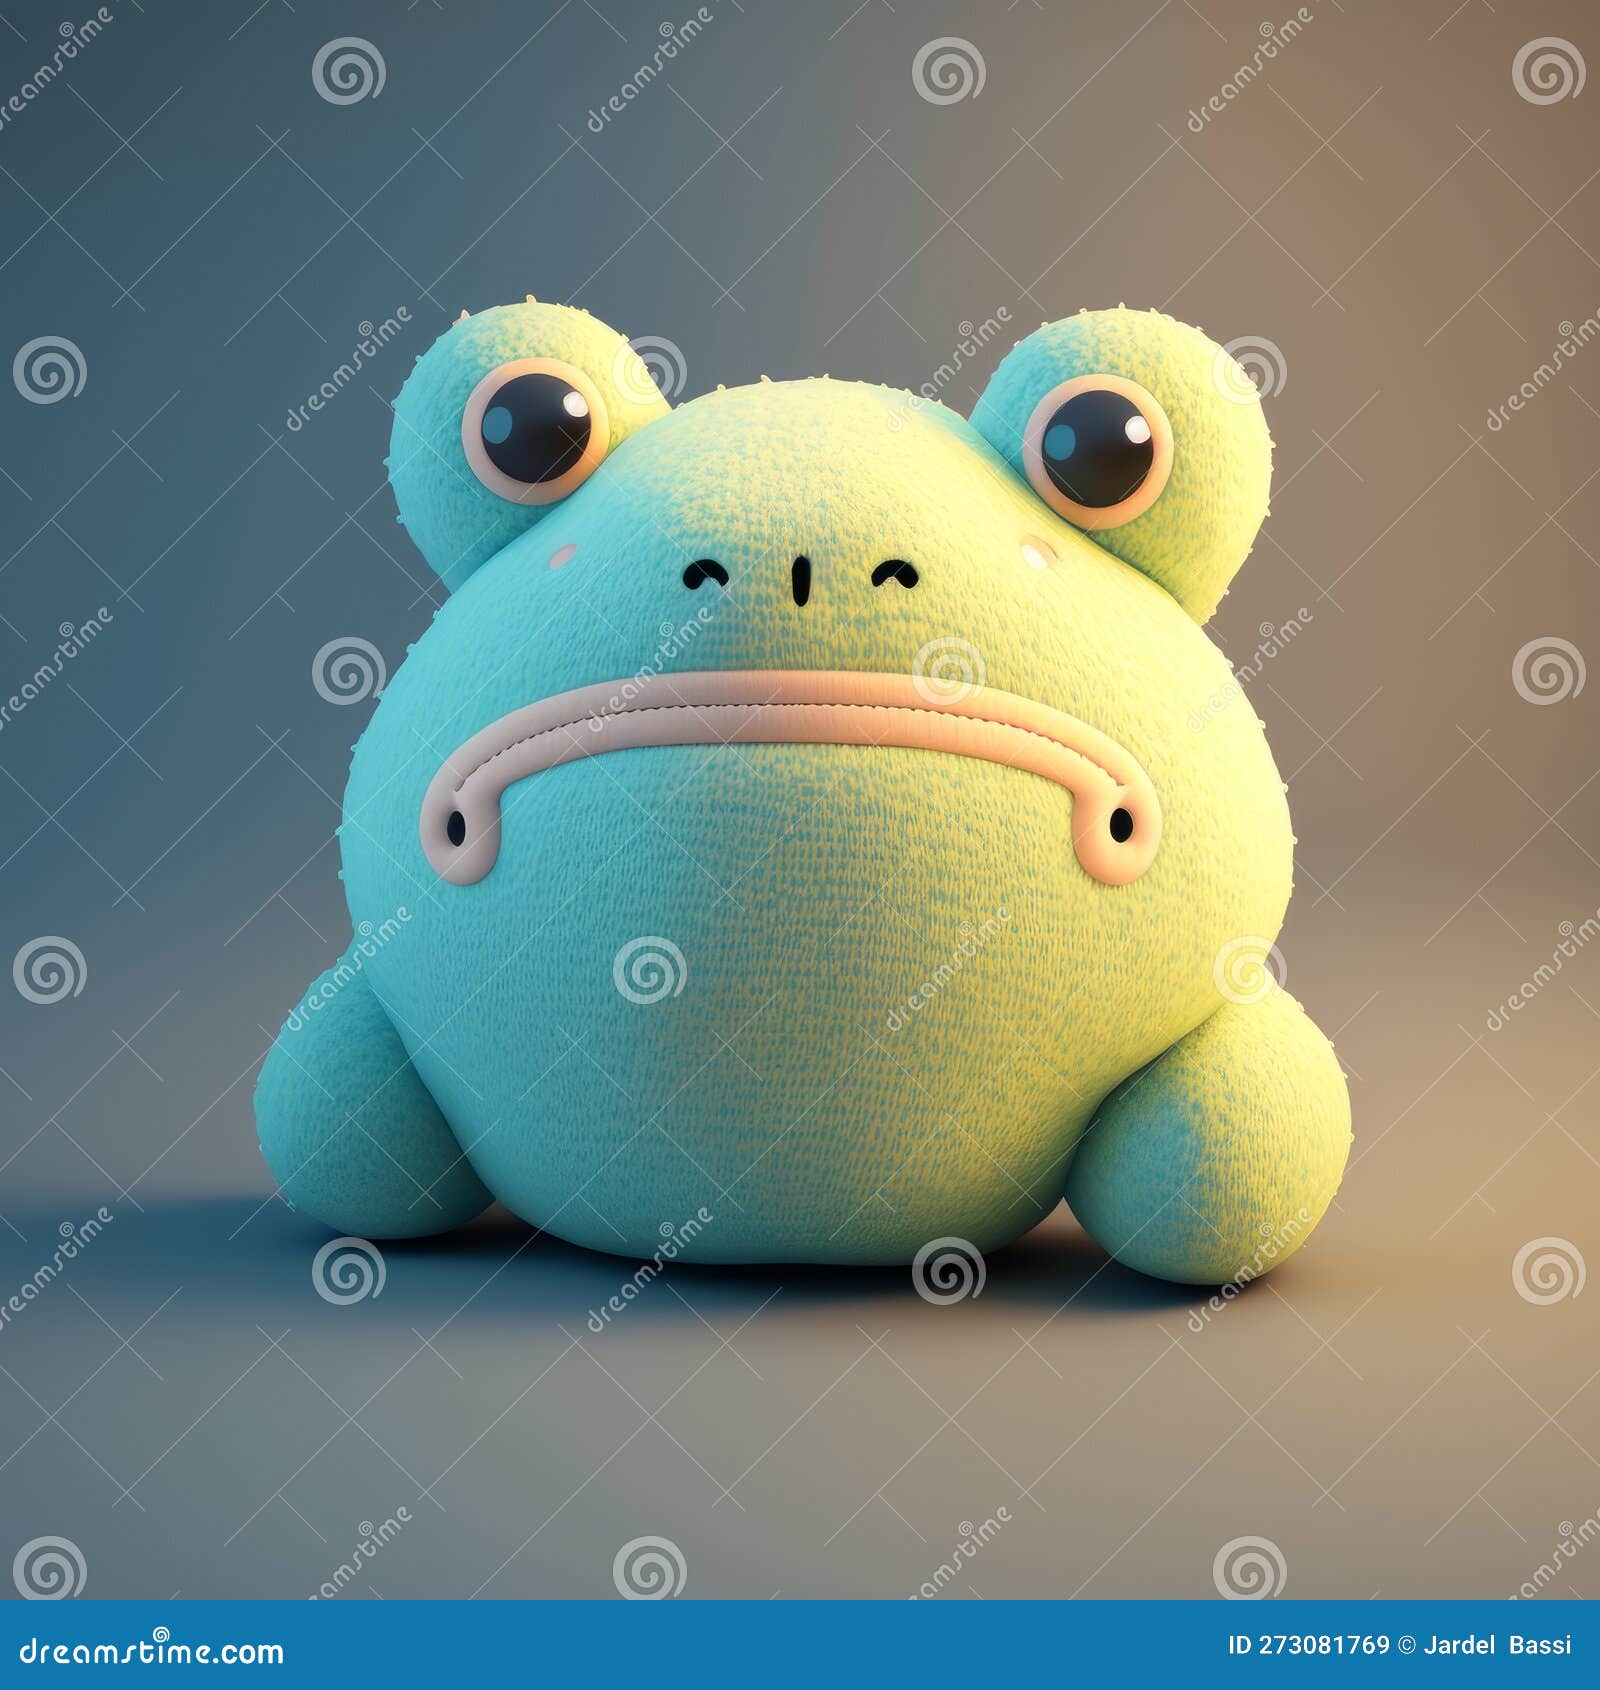 Hoppy Friends - Adorable Frog Plush Toy for Kids Stock